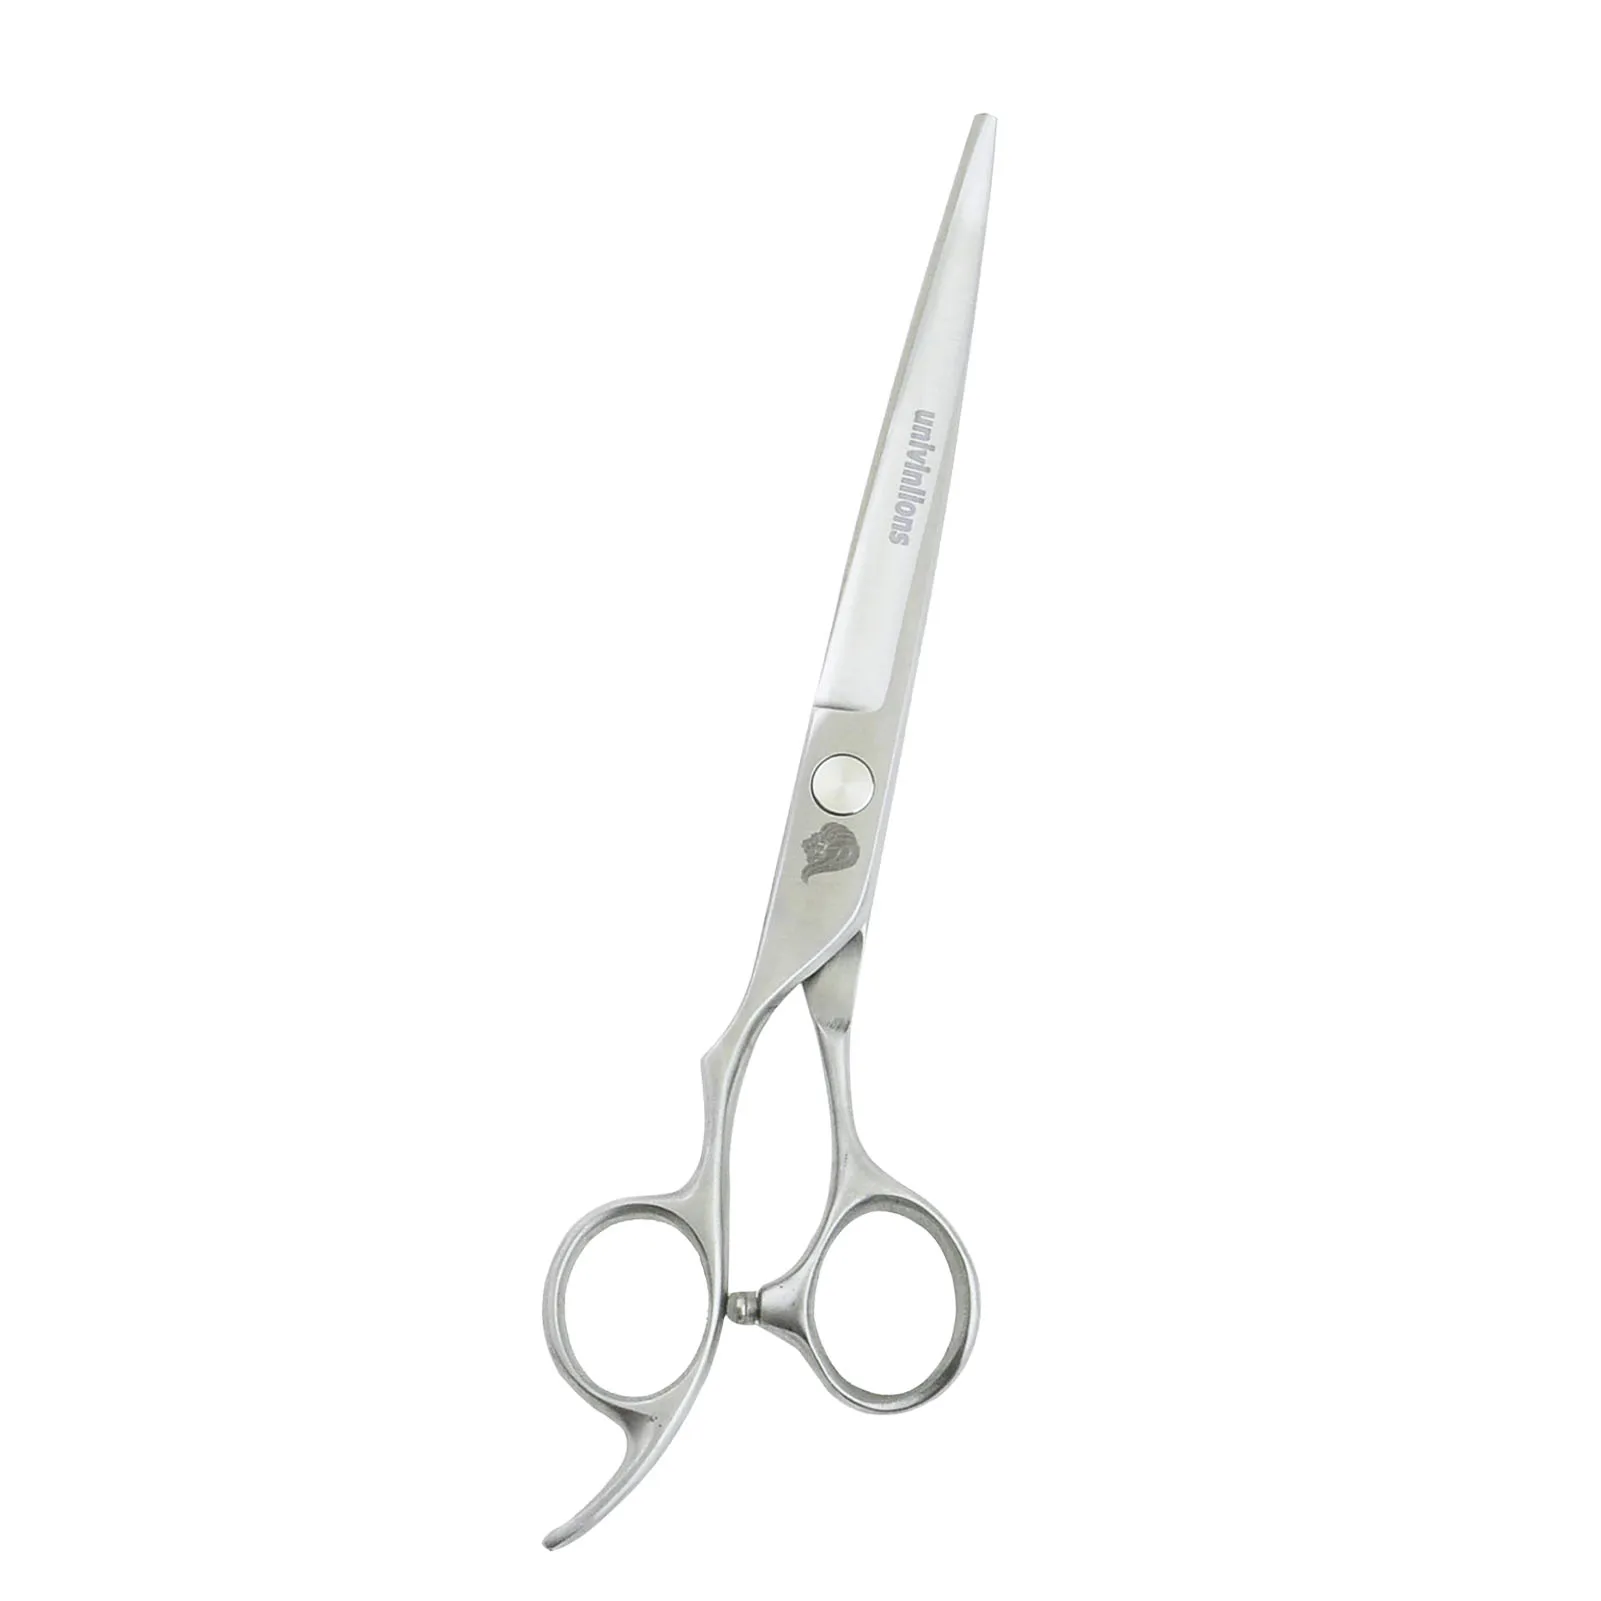 

7" Left Hand Barber Pet Dog Grooming Scissors Lefty Thinning Scissors Hair Clippers Salon Haircut Left Handed Cutting Shears